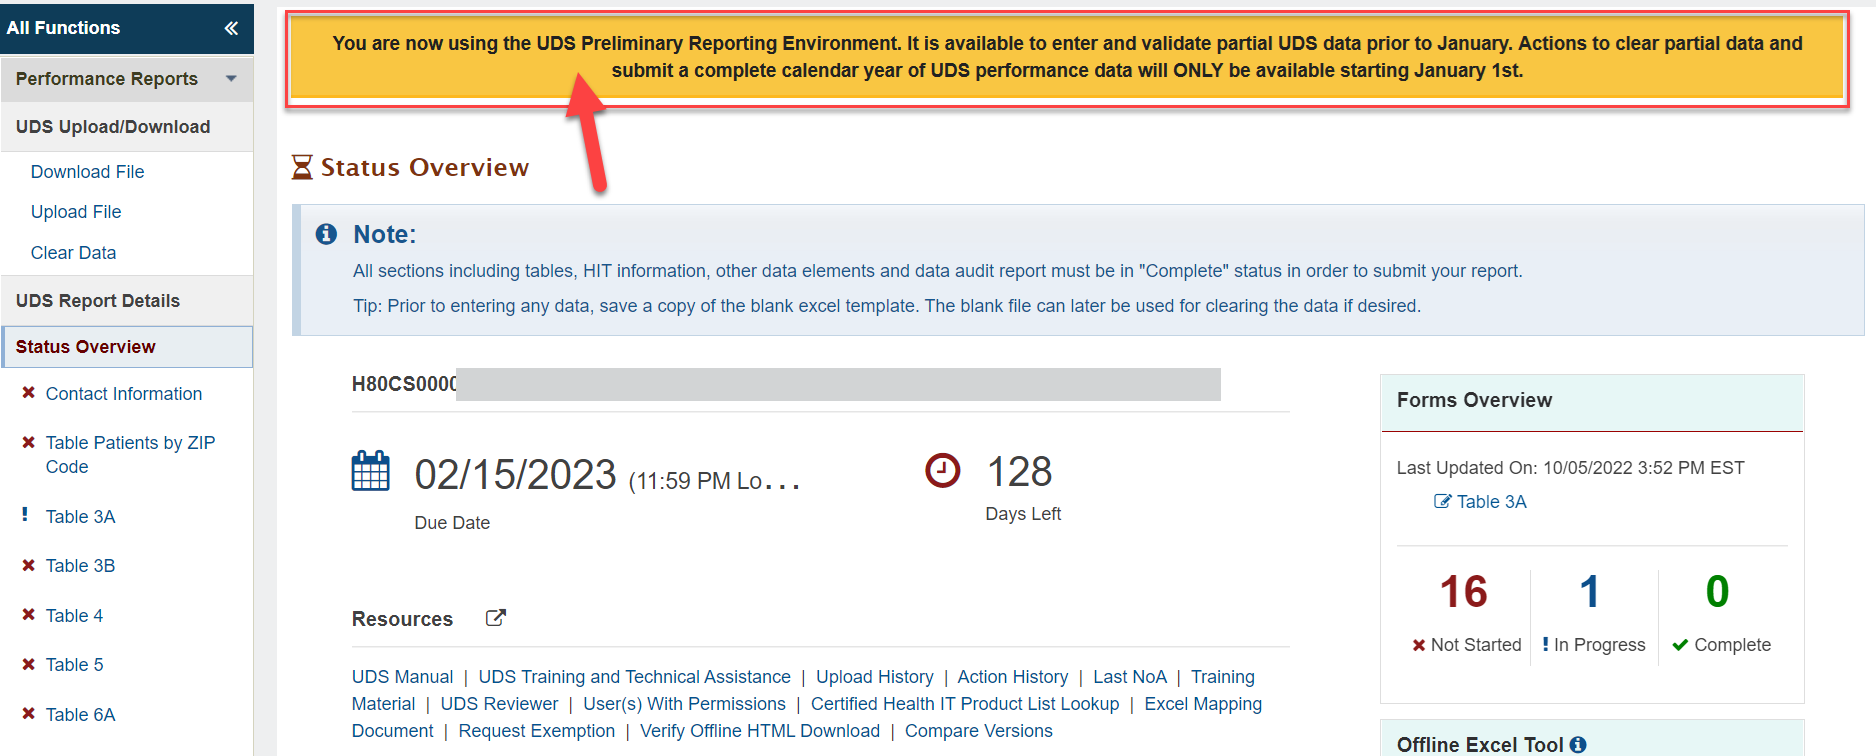 Screenshot of the Status Overview page showing the Preliminary Reporting Environment PRE